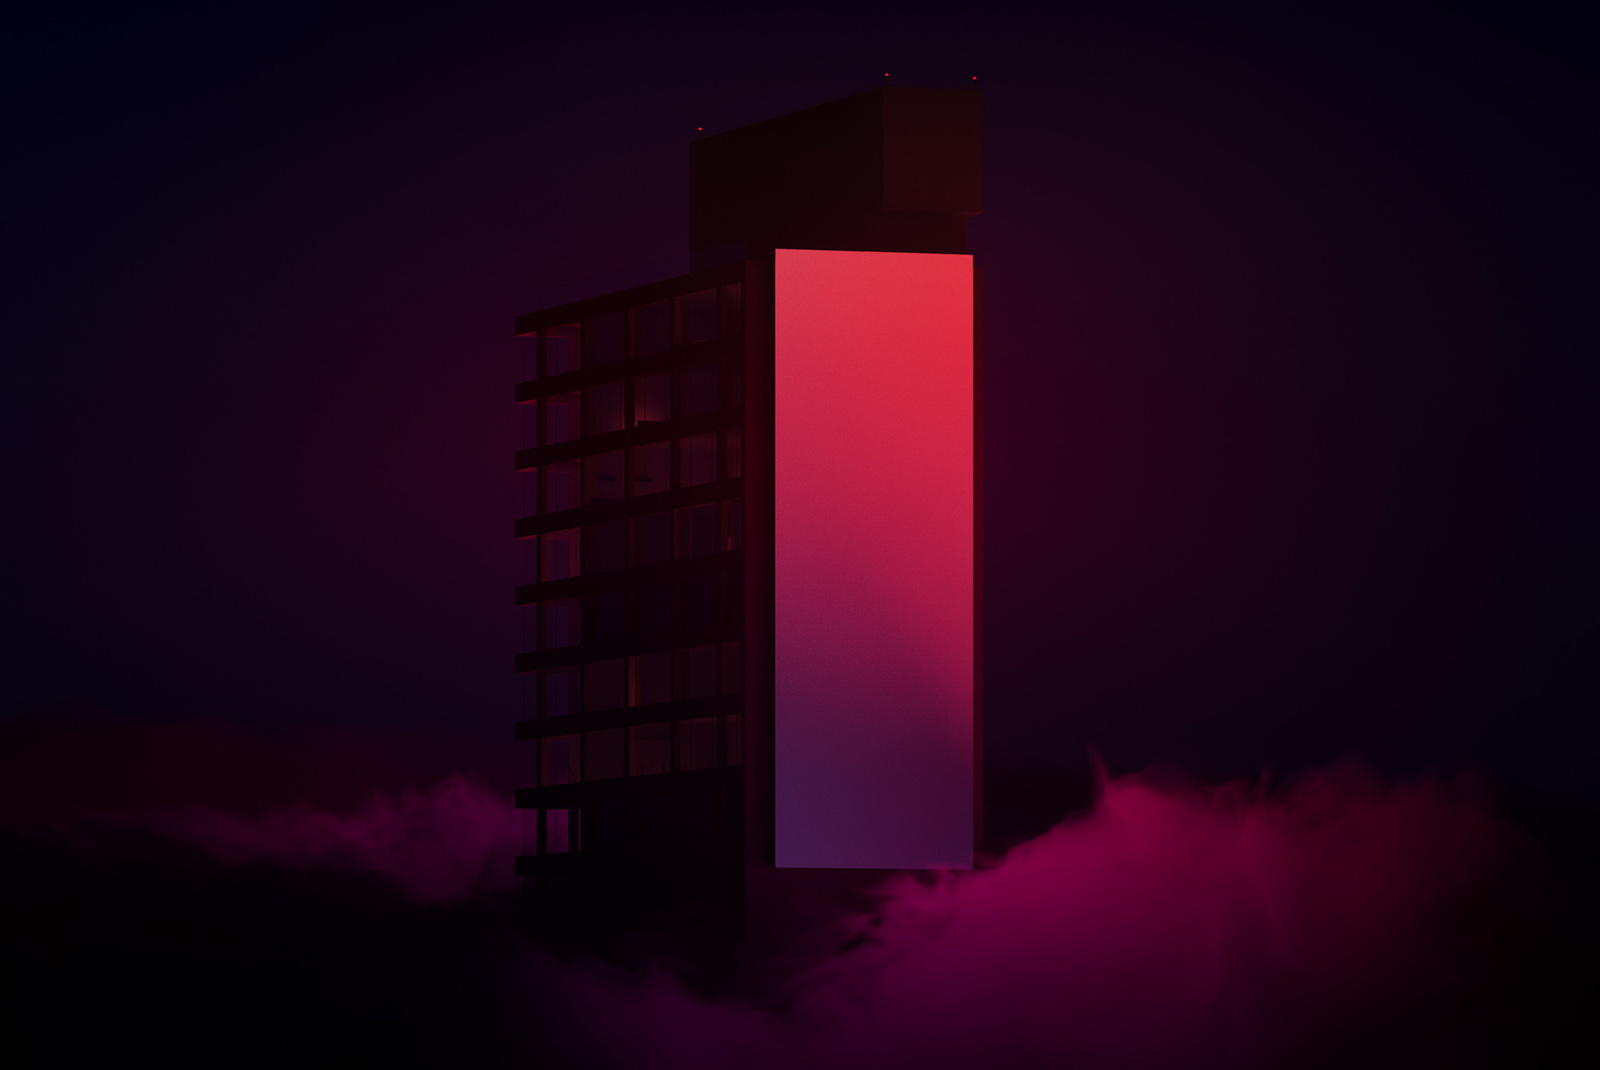 3D building billboard mockup at night with luminous red advert space, surrounded by dark mist for design presentation.